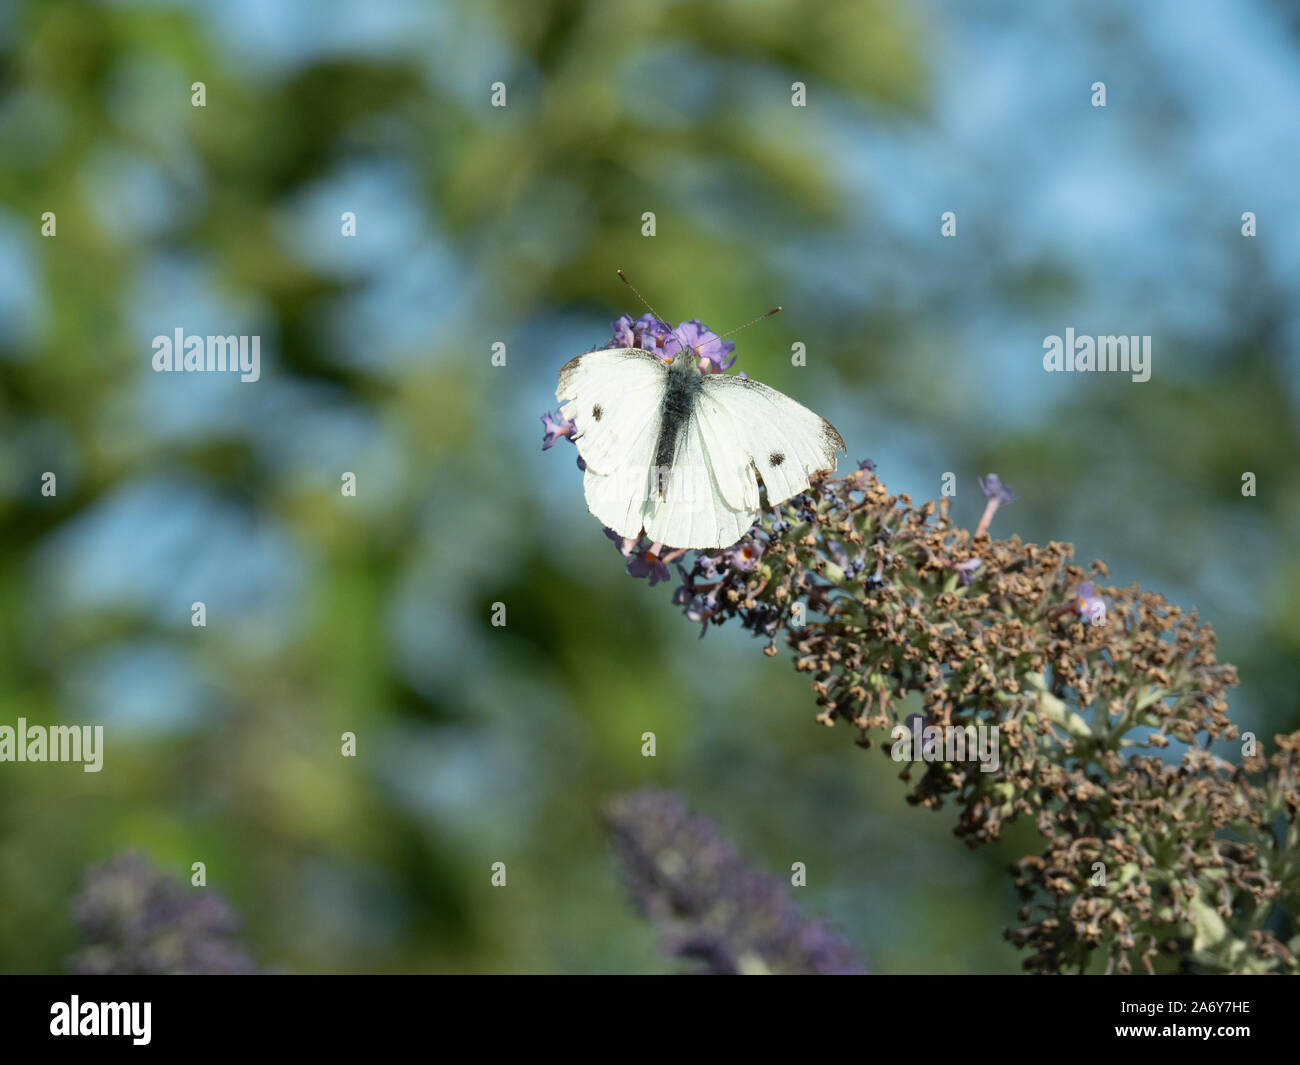 A small white butterfly feeding on a Buddleia spike Stock Photo